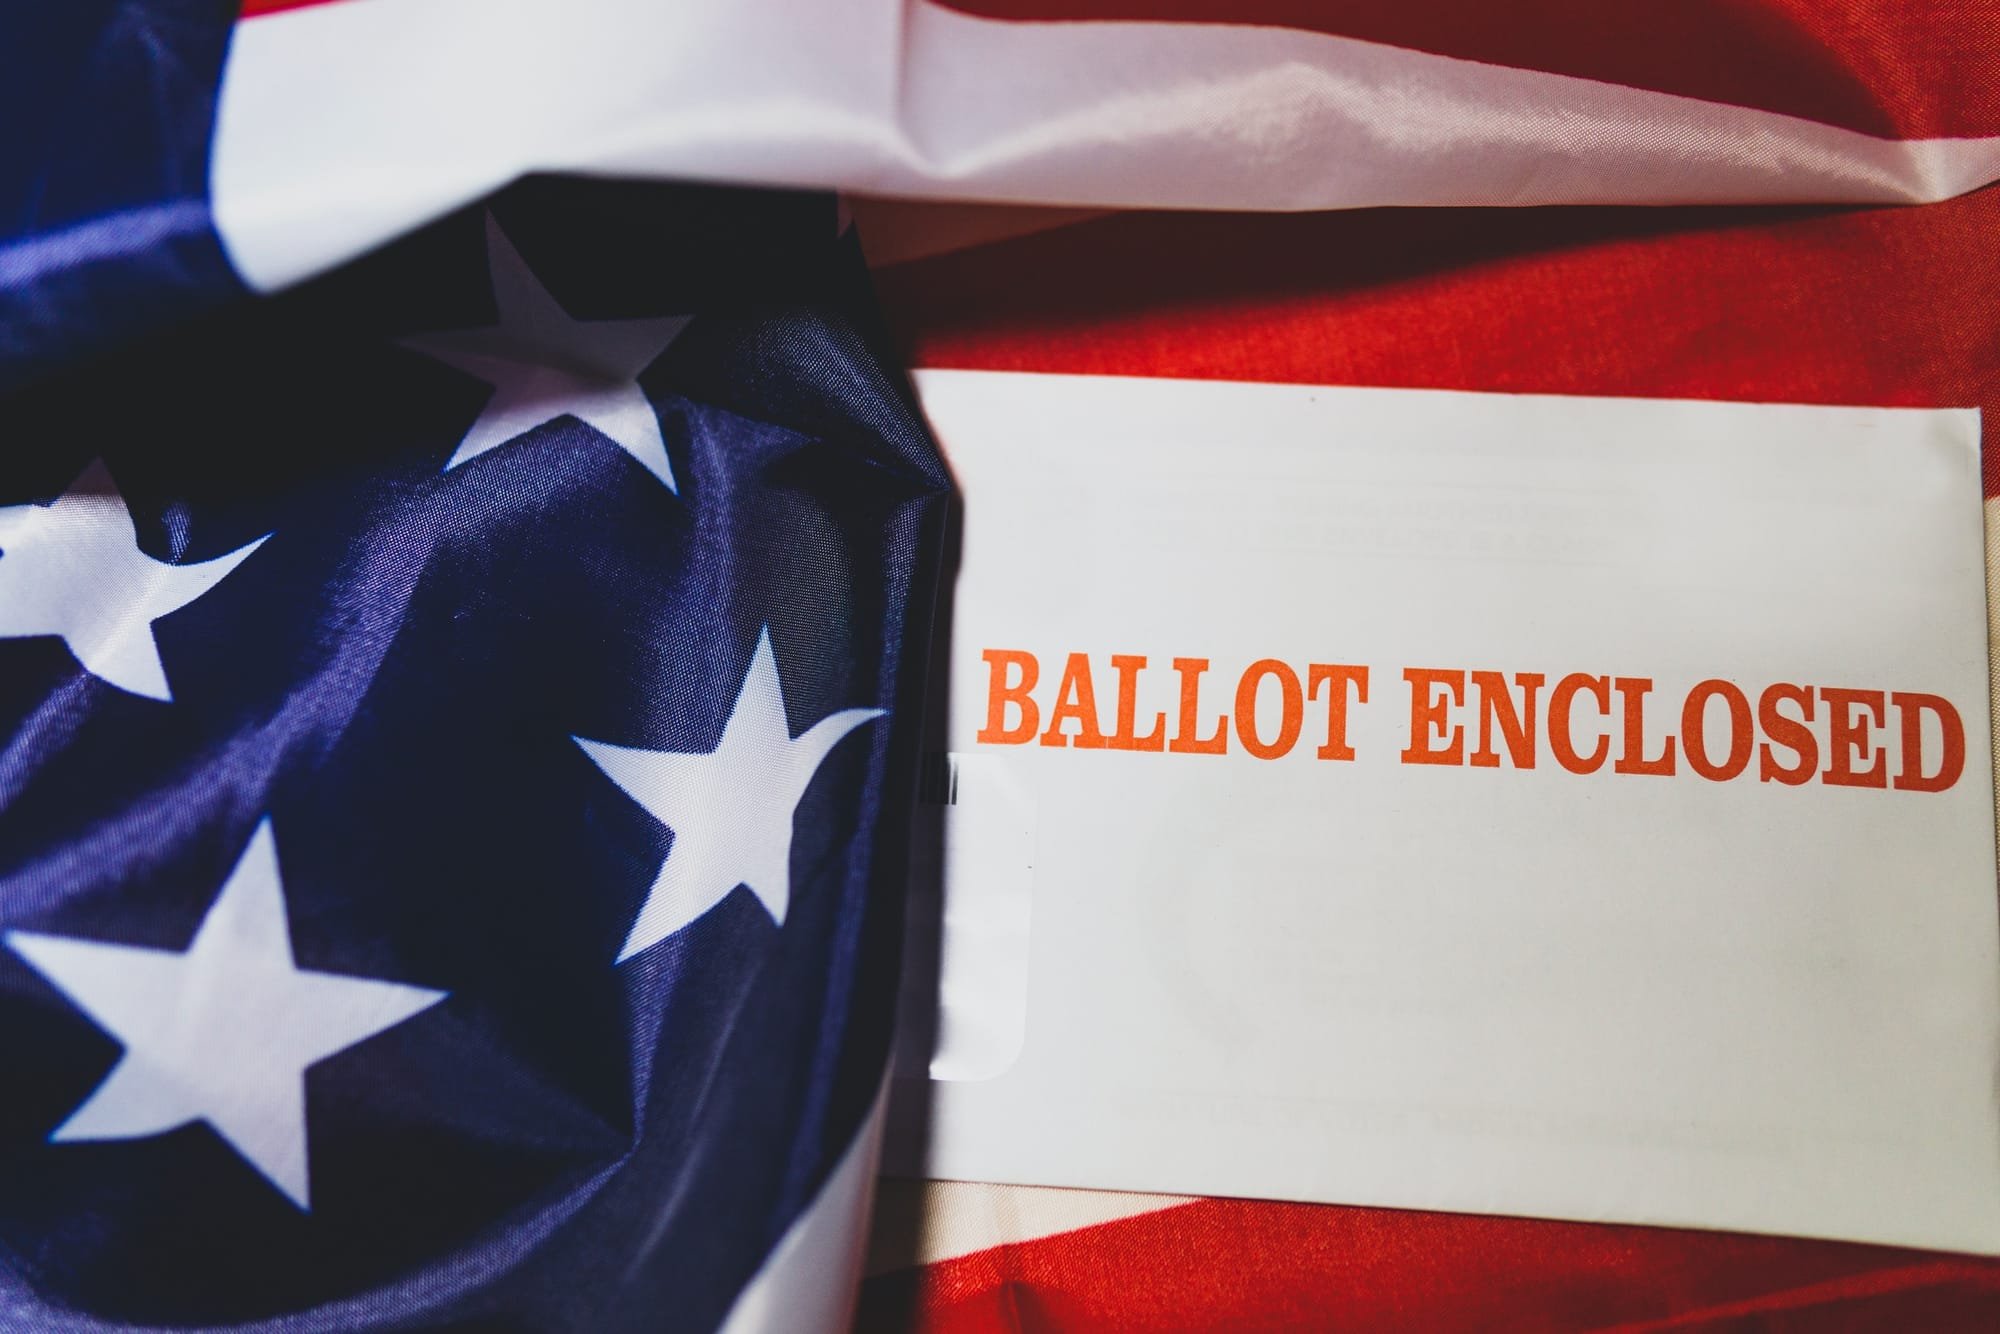 Can The GOP Win By Ballot Harvesting? Yes they can.